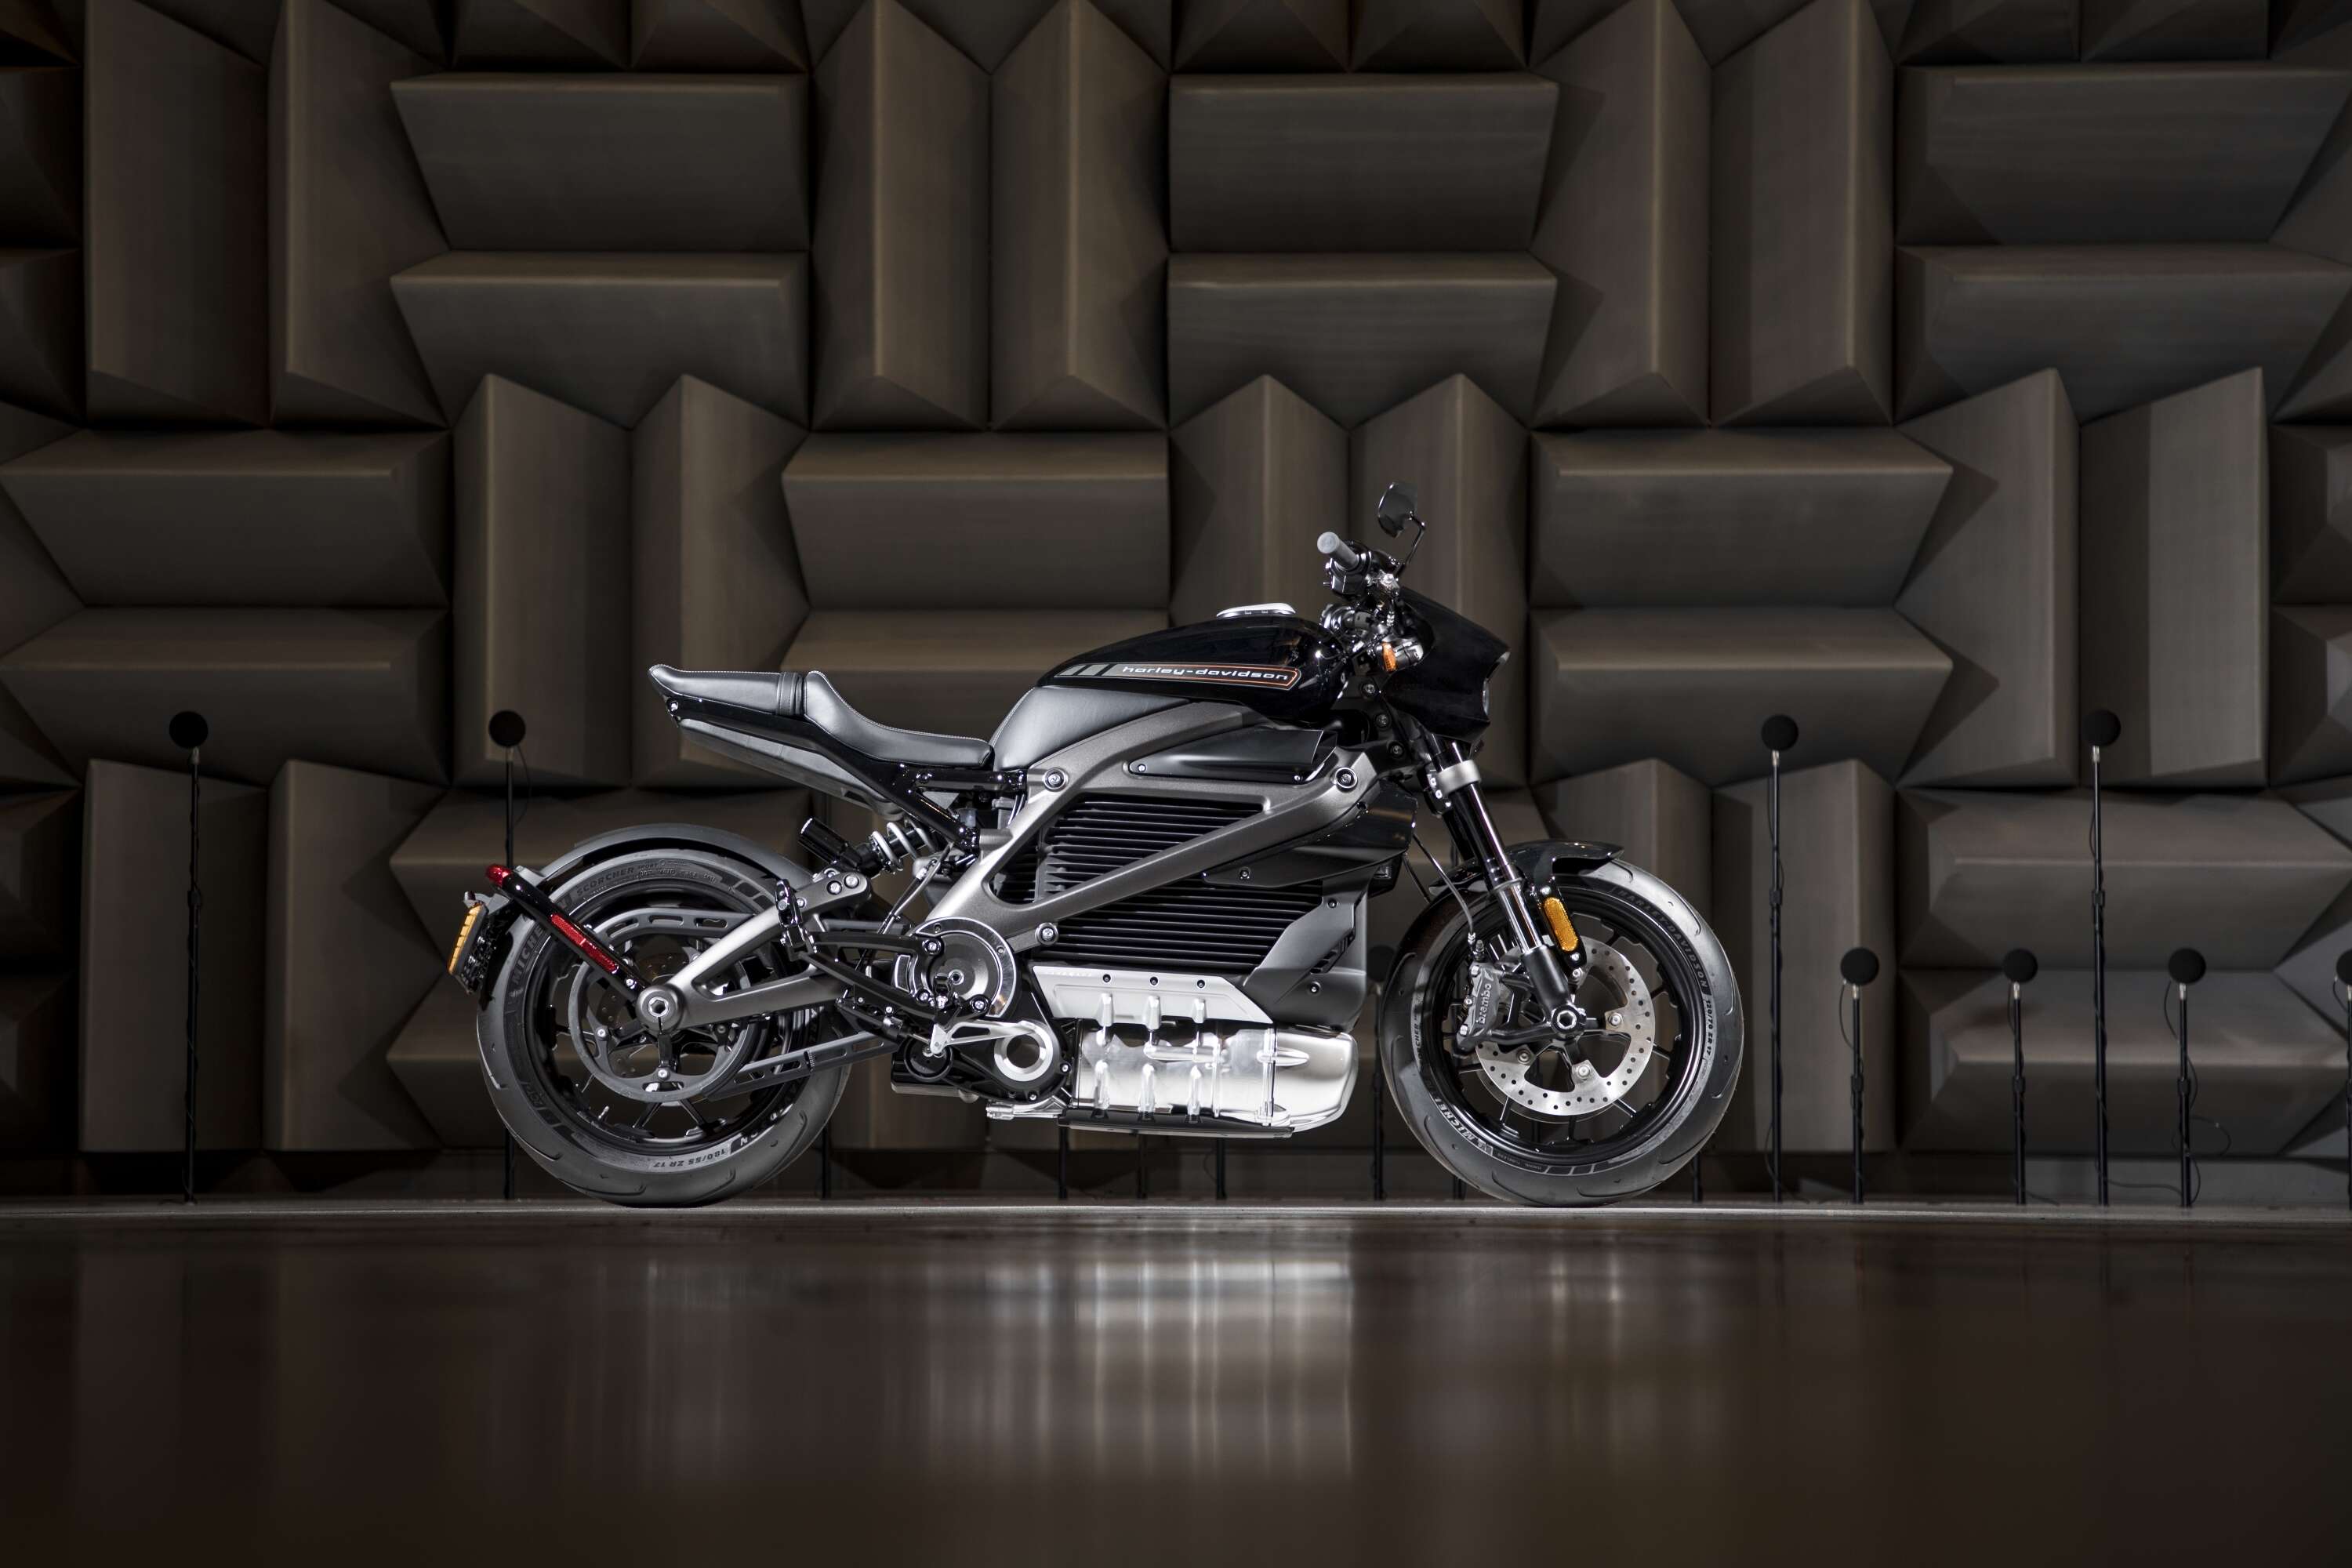 Harley-Davidson to Launch a Naked Bike and Adventure Bike in 2020 - The